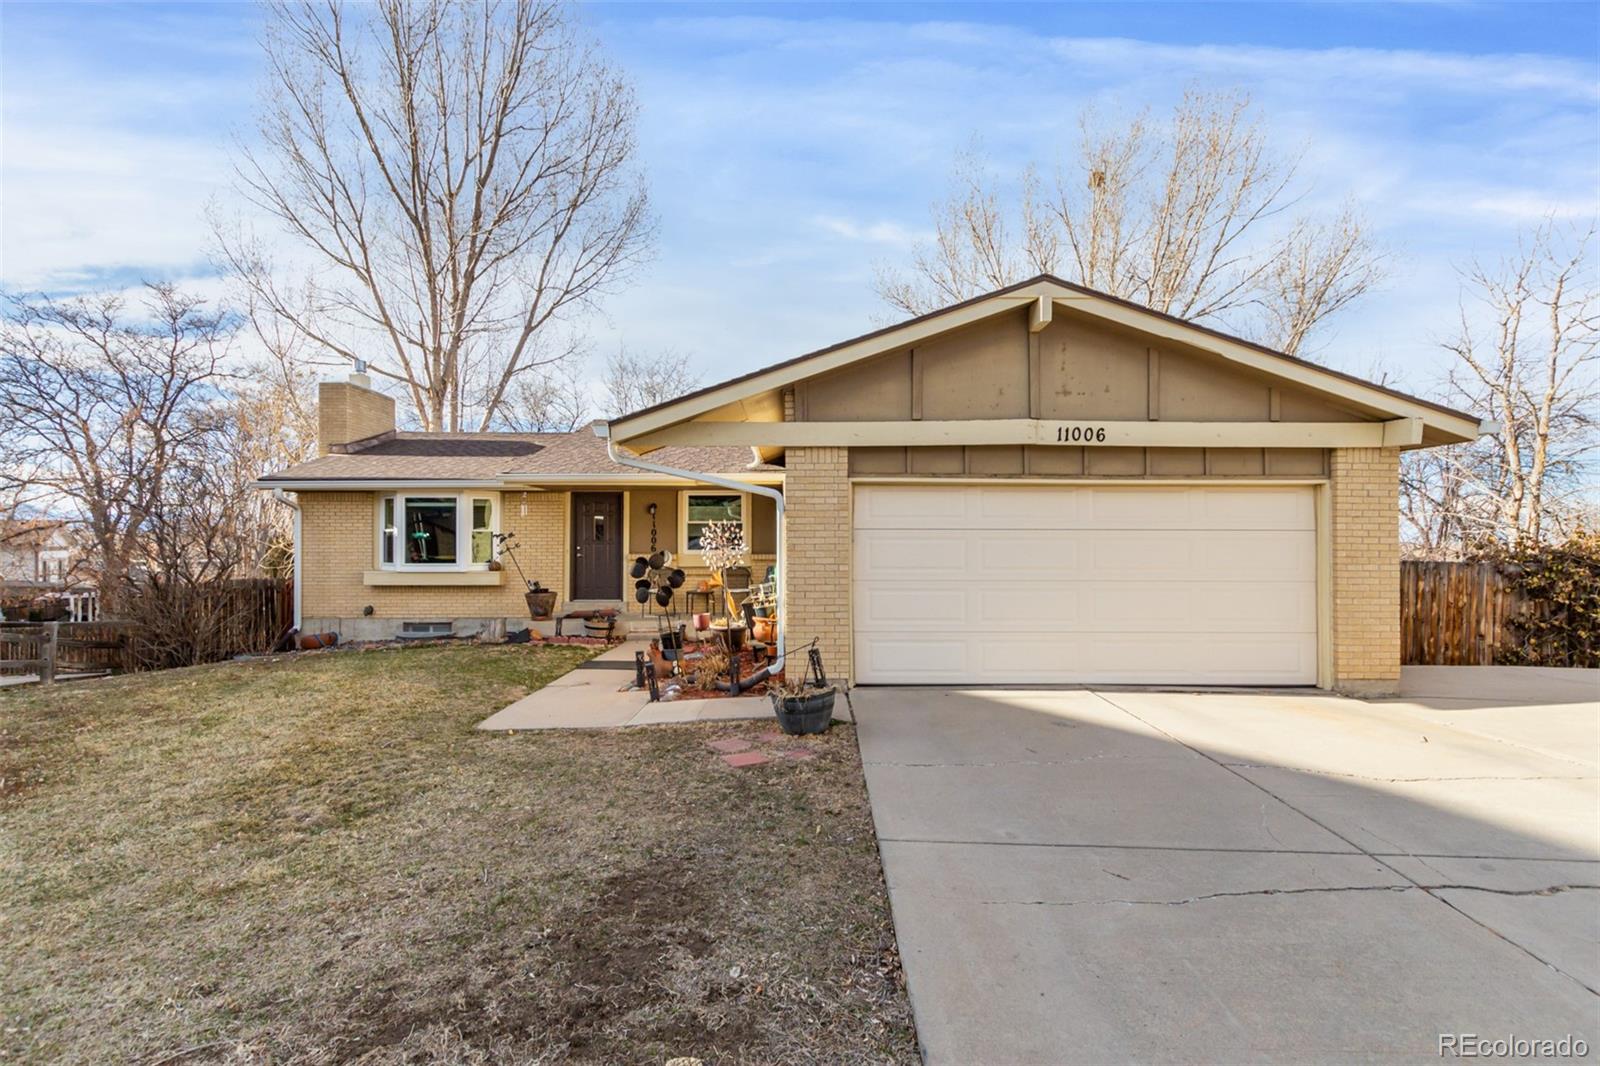 11006  vrain court, Westminster sold home. Closed on 2024-04-15 for $610,000.